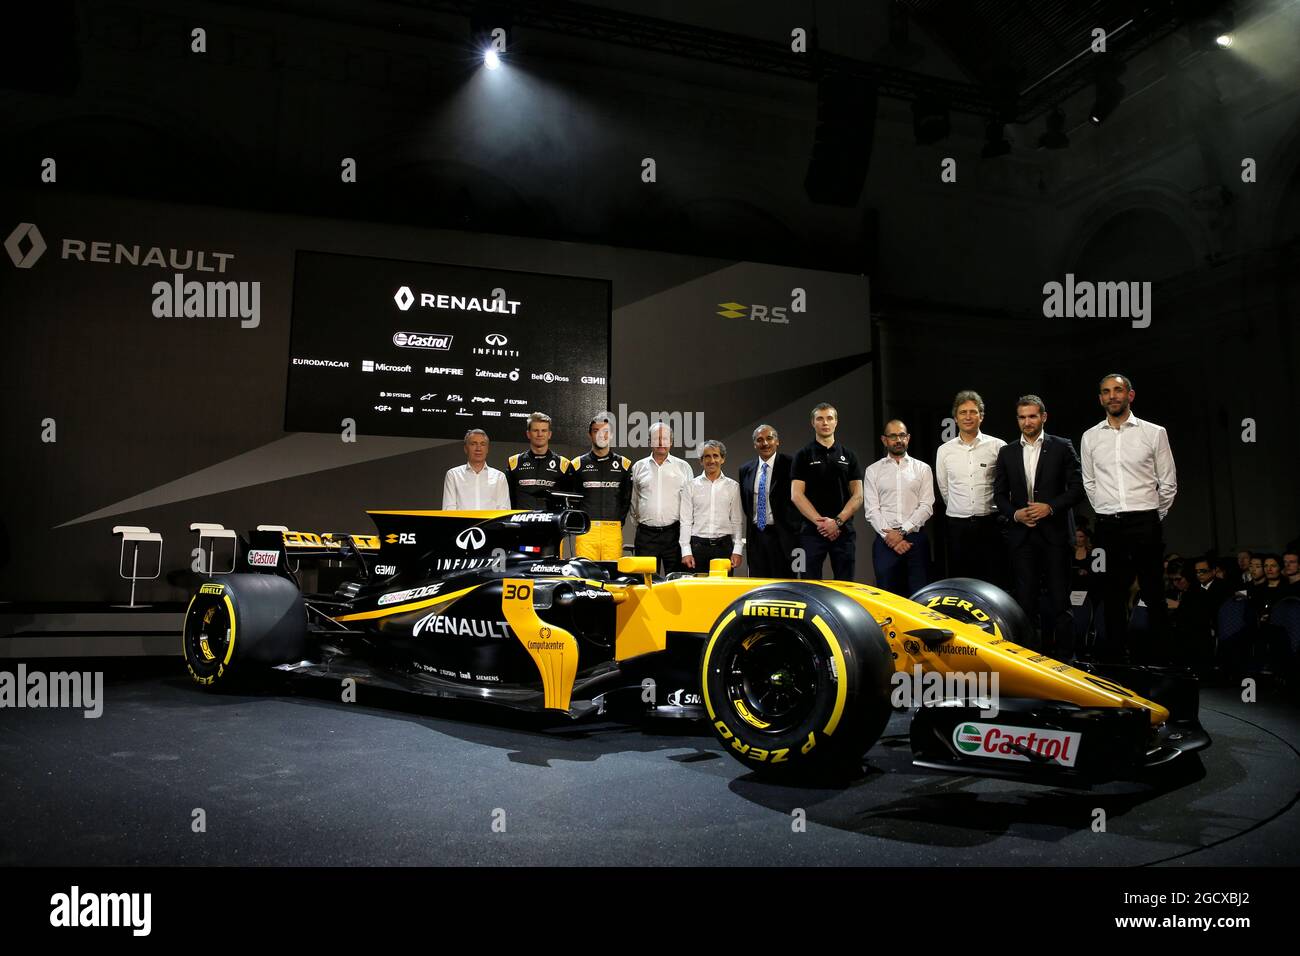 (L bis R): Bob Bell (GBR) Renault Sport F1 Team Chief Technical Officer; Nico Hulkenberg (GER) Renault Sport F1 Team; Jolyon Palmer (GBR) Renault Sport F1 Team; Jerome Stoll (FRA) Renault Sport F1 President; Alain Prost (FRA); Mandhir Singh, Castol COO; Sergey Sirotkin (RUS) Renault Sport F1 Team Dritter Fahrer; Thierry Koskas, Renault Executive Vice President of Sales and Marketing; Pepijn Richter, Microsoft Director of Product Marketing; Tommaso Volpe, Infiniti Global Director of Motorsport; Cyril Abiteboul (FRA) Renault Sport F1 Managing Director, mit dem Renault Sport F1 Team RS17. Renault Stockfoto